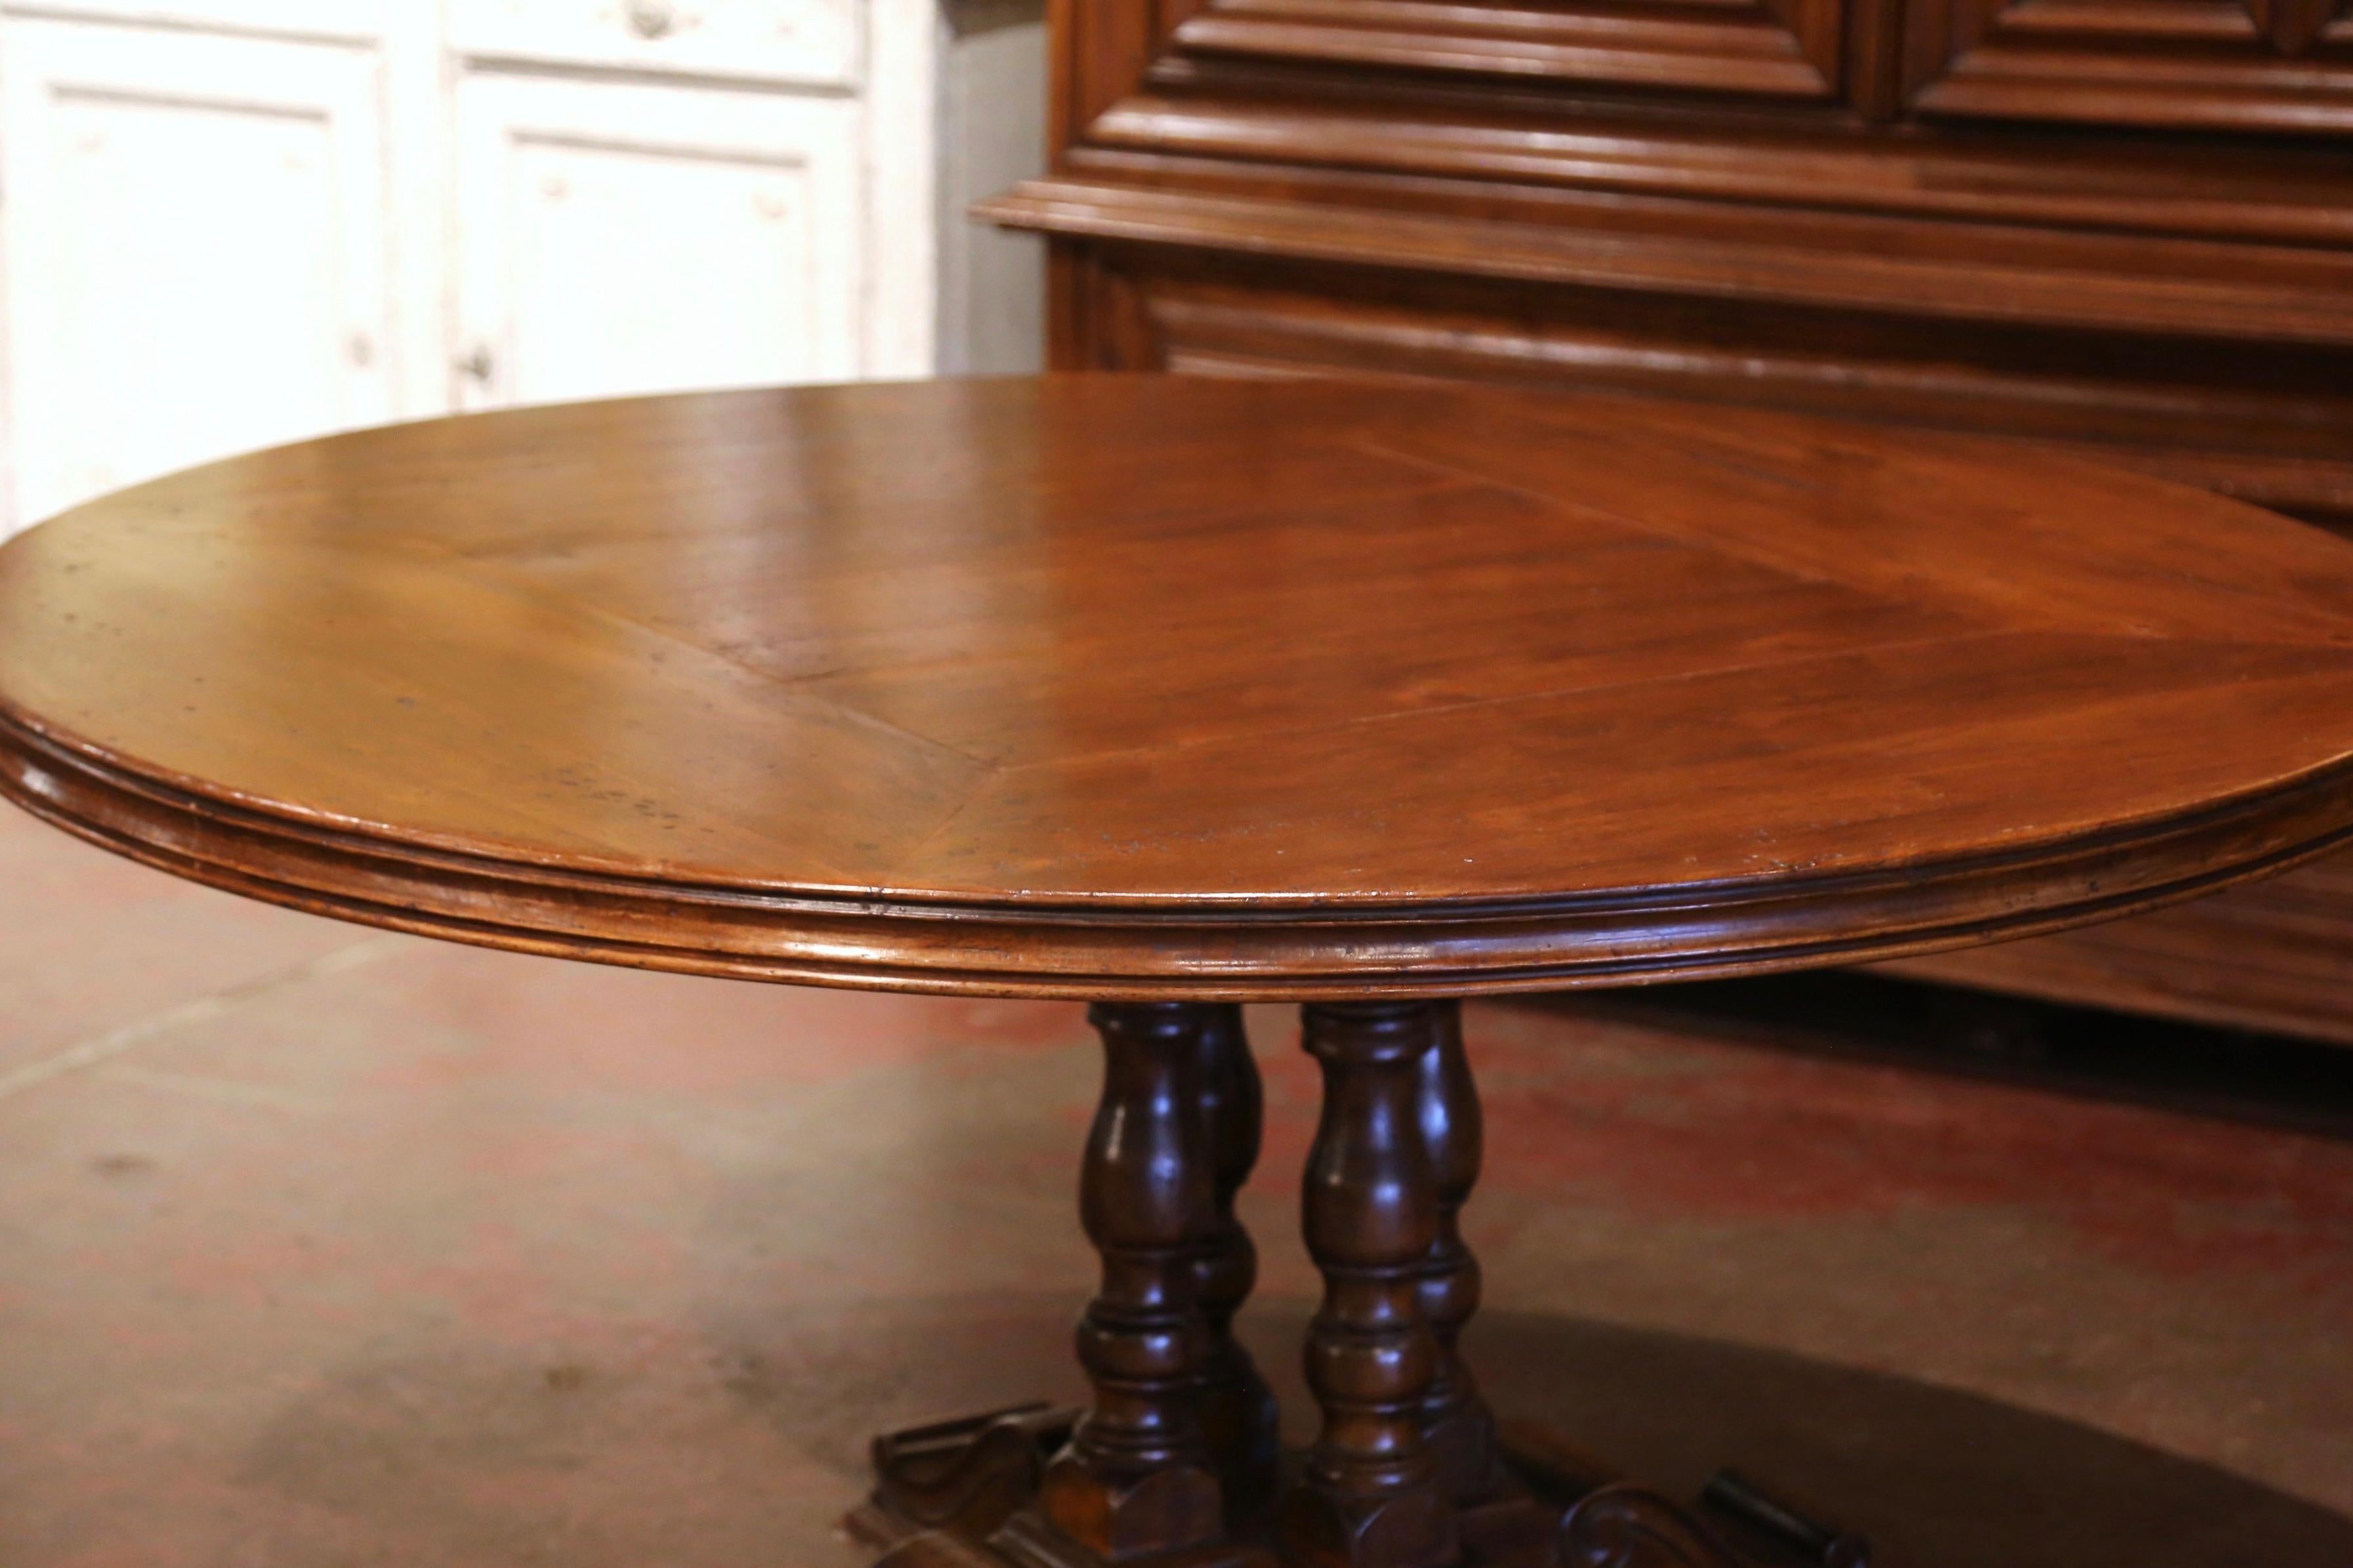 Crafted in the Pyrenees mountains of France circa 1990, and built with old walnut timber, the table stands on a four carved and turned columns pedestal base, supported by flat and carved feet for ultimate stability. The sturdy table dressed with a